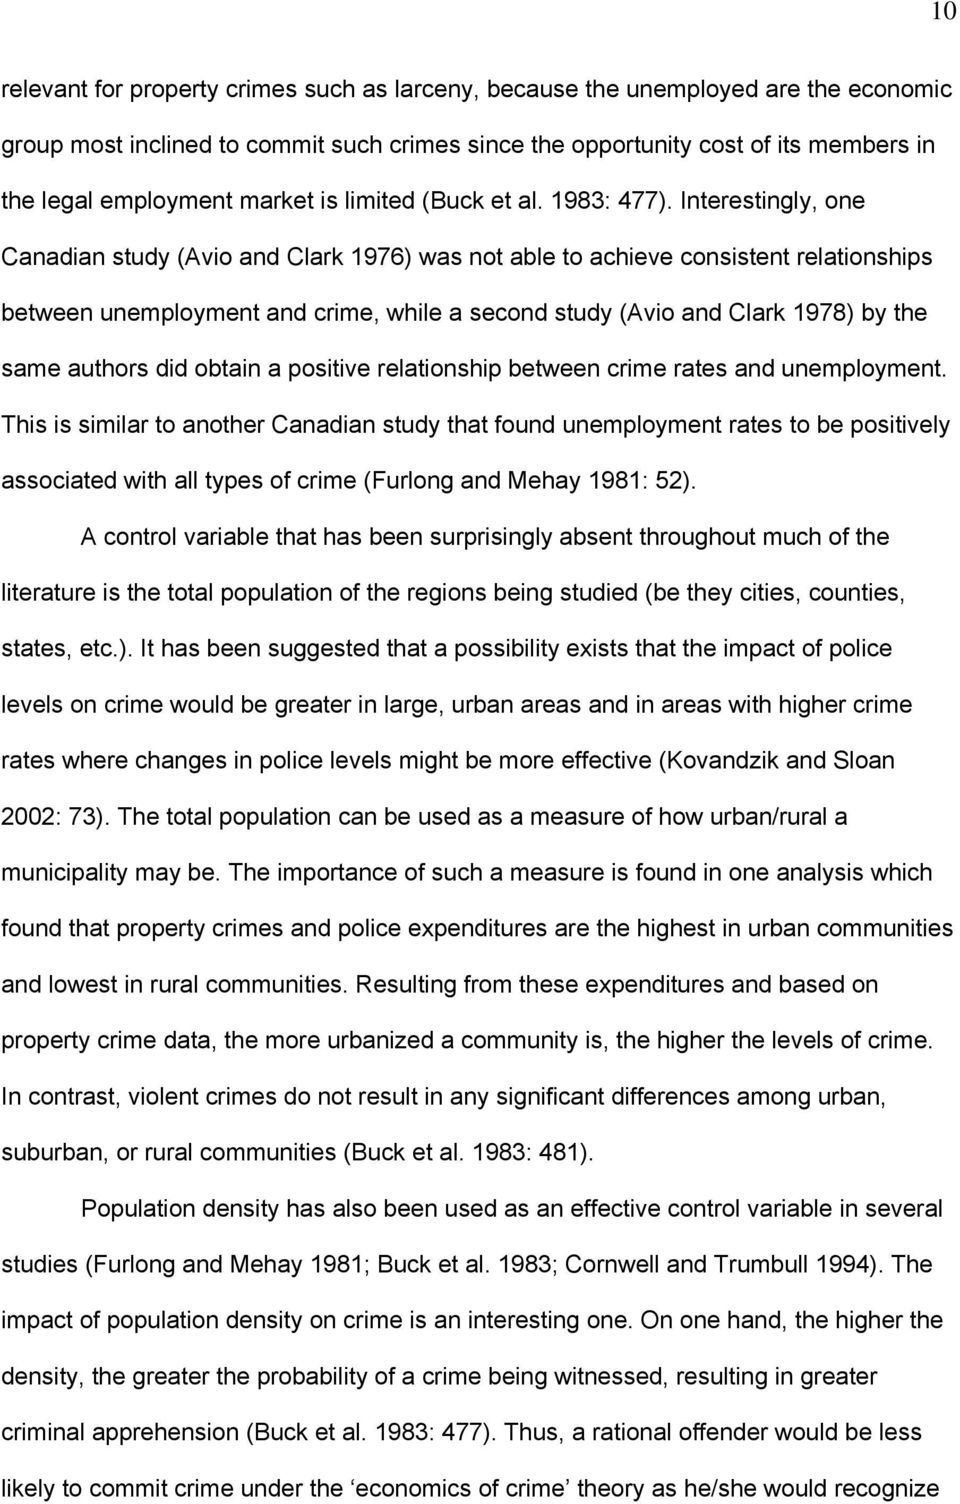 Interestingly, one Canadian study (Avio and Clark 1976) was not able to achieve consistent relationships between unemployment and crime, while a second study (Avio and Clark 1978) by the same authors